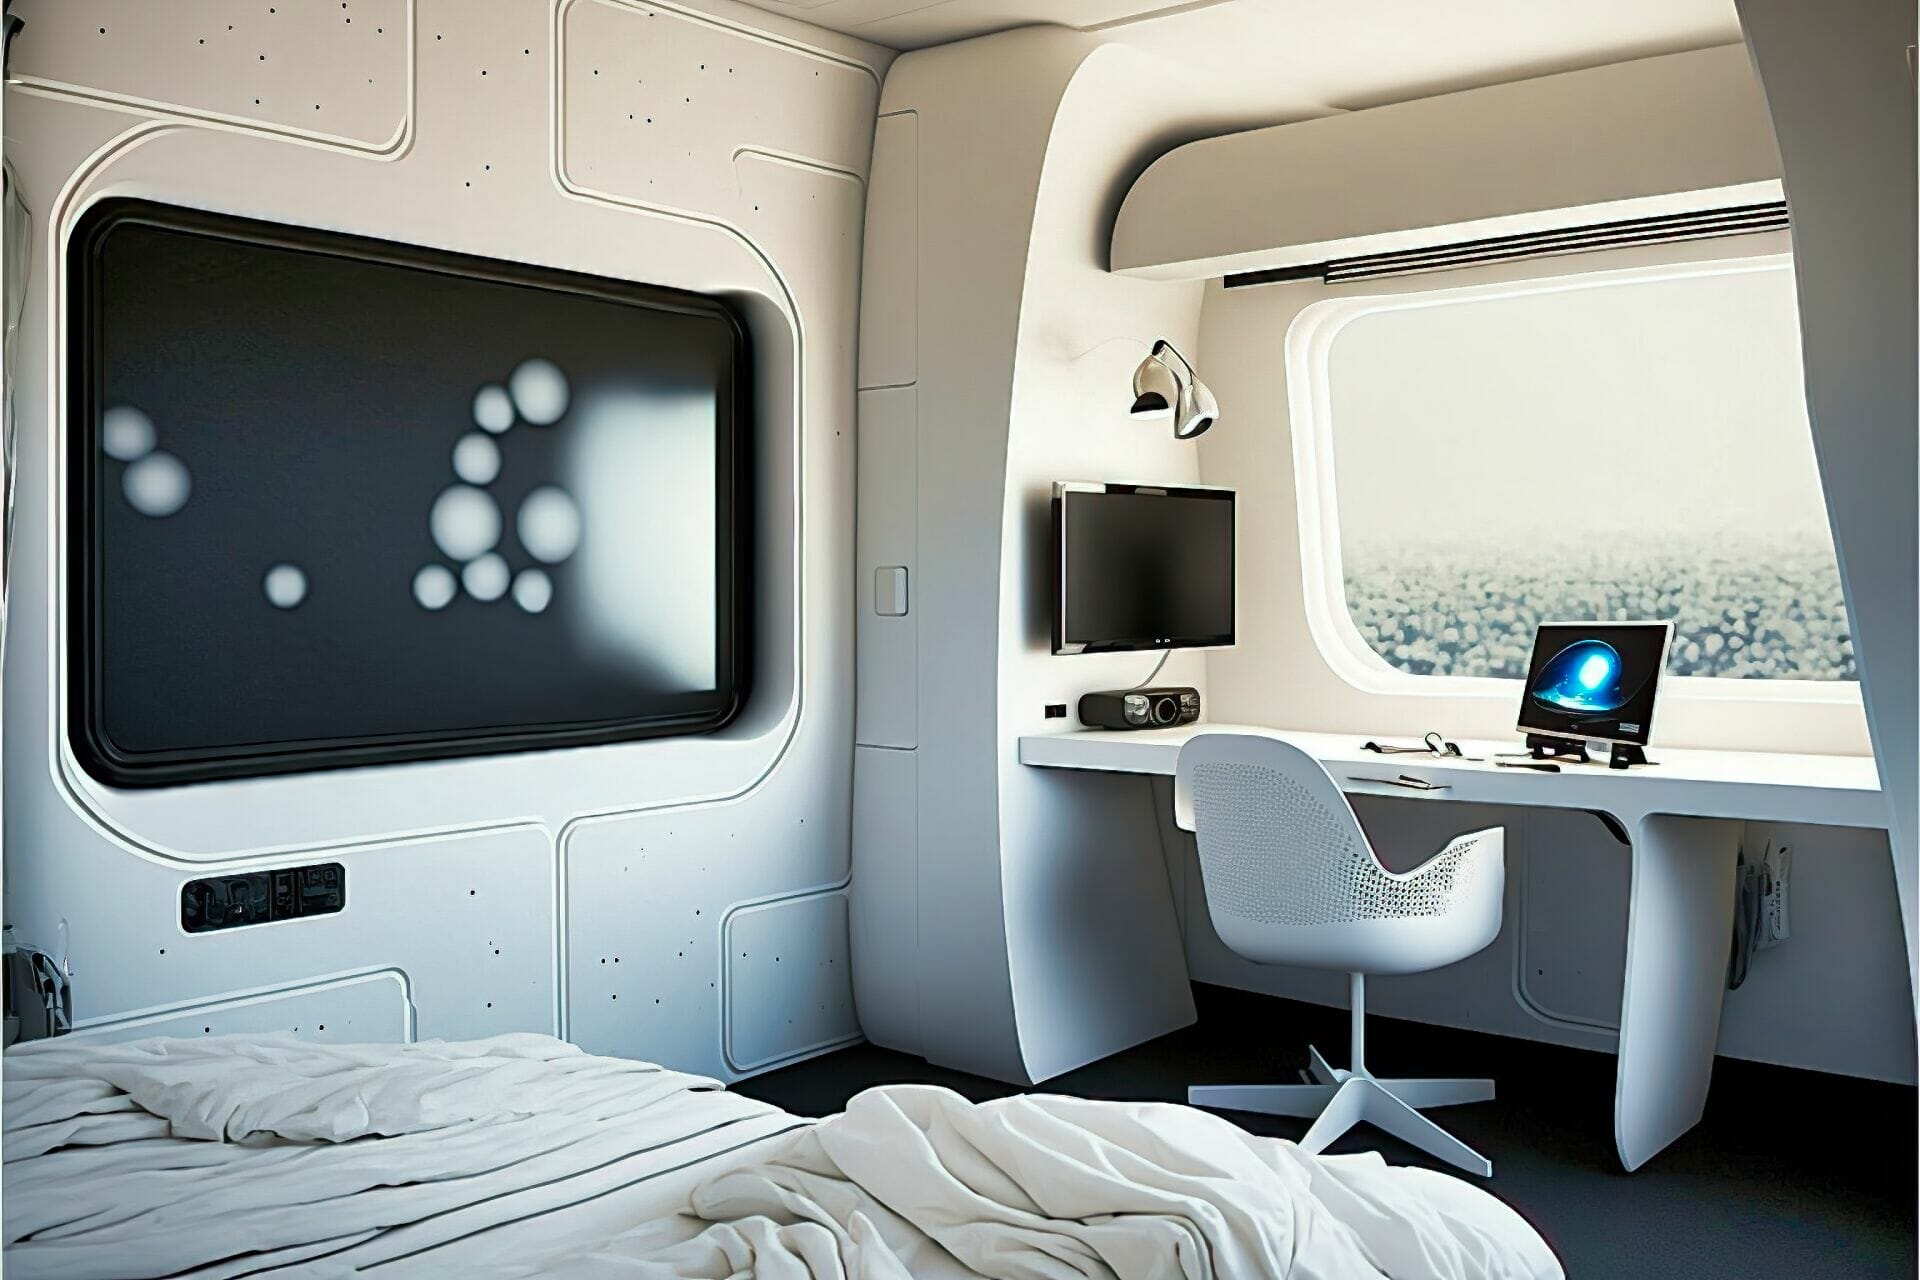 Futuristic Style Bedroom With High-Tech Touches: This Bedroom Features Modern Touches Like A Large, Built-In Wall Monitor, A Sleek Desk And Chair, And A Sleek Bed With A High Tech Headboard. The Walls And Ceiling Are Painted A Bright White, And The Floor Is Made Up Of Sleek Black Tiles.